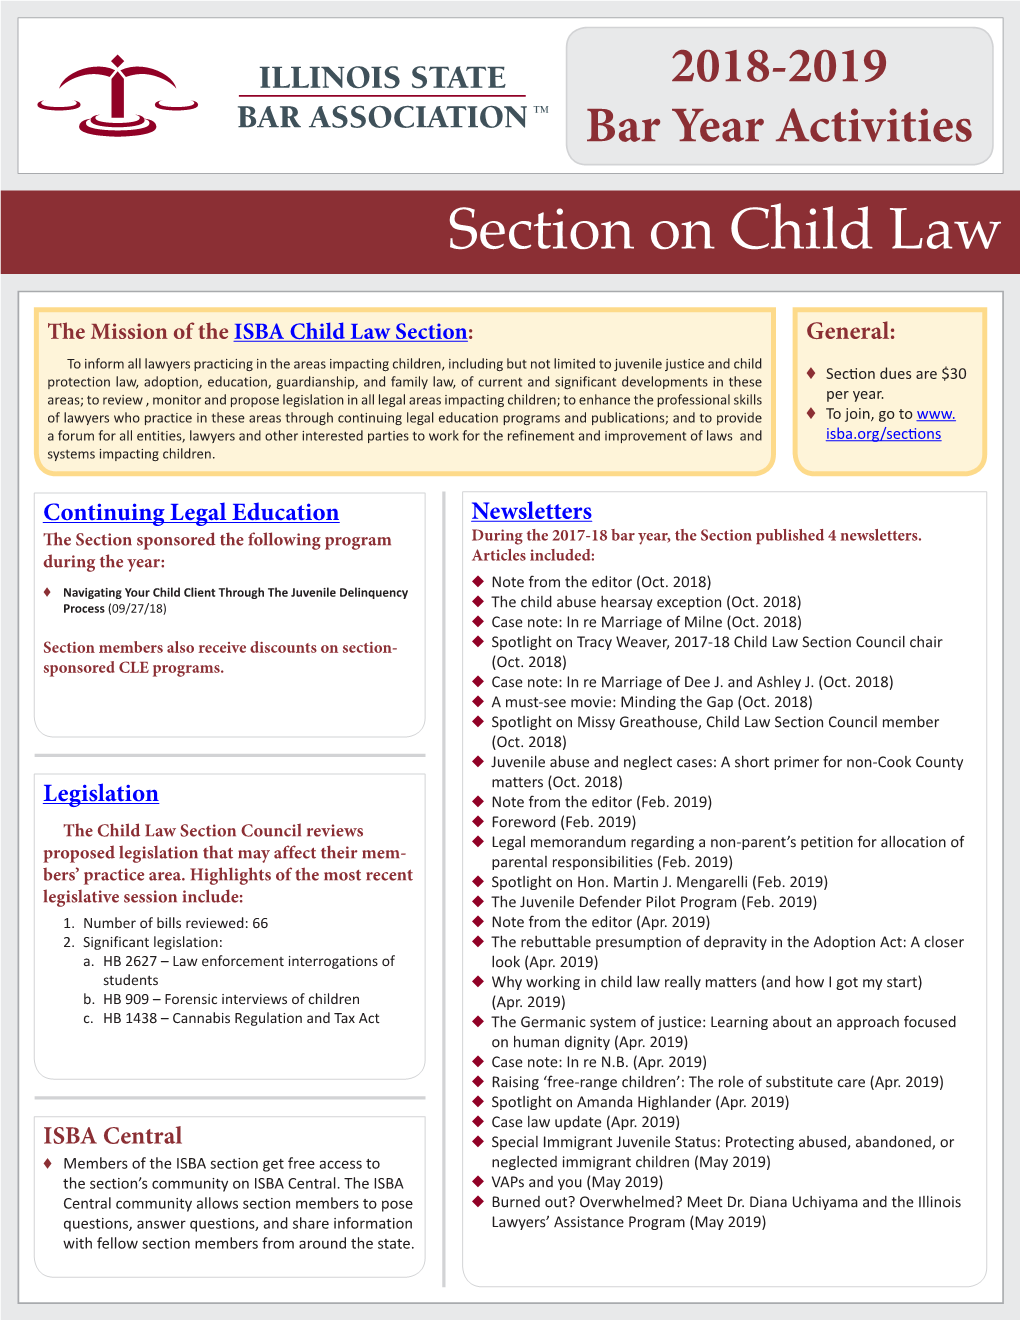 Section on Child Law